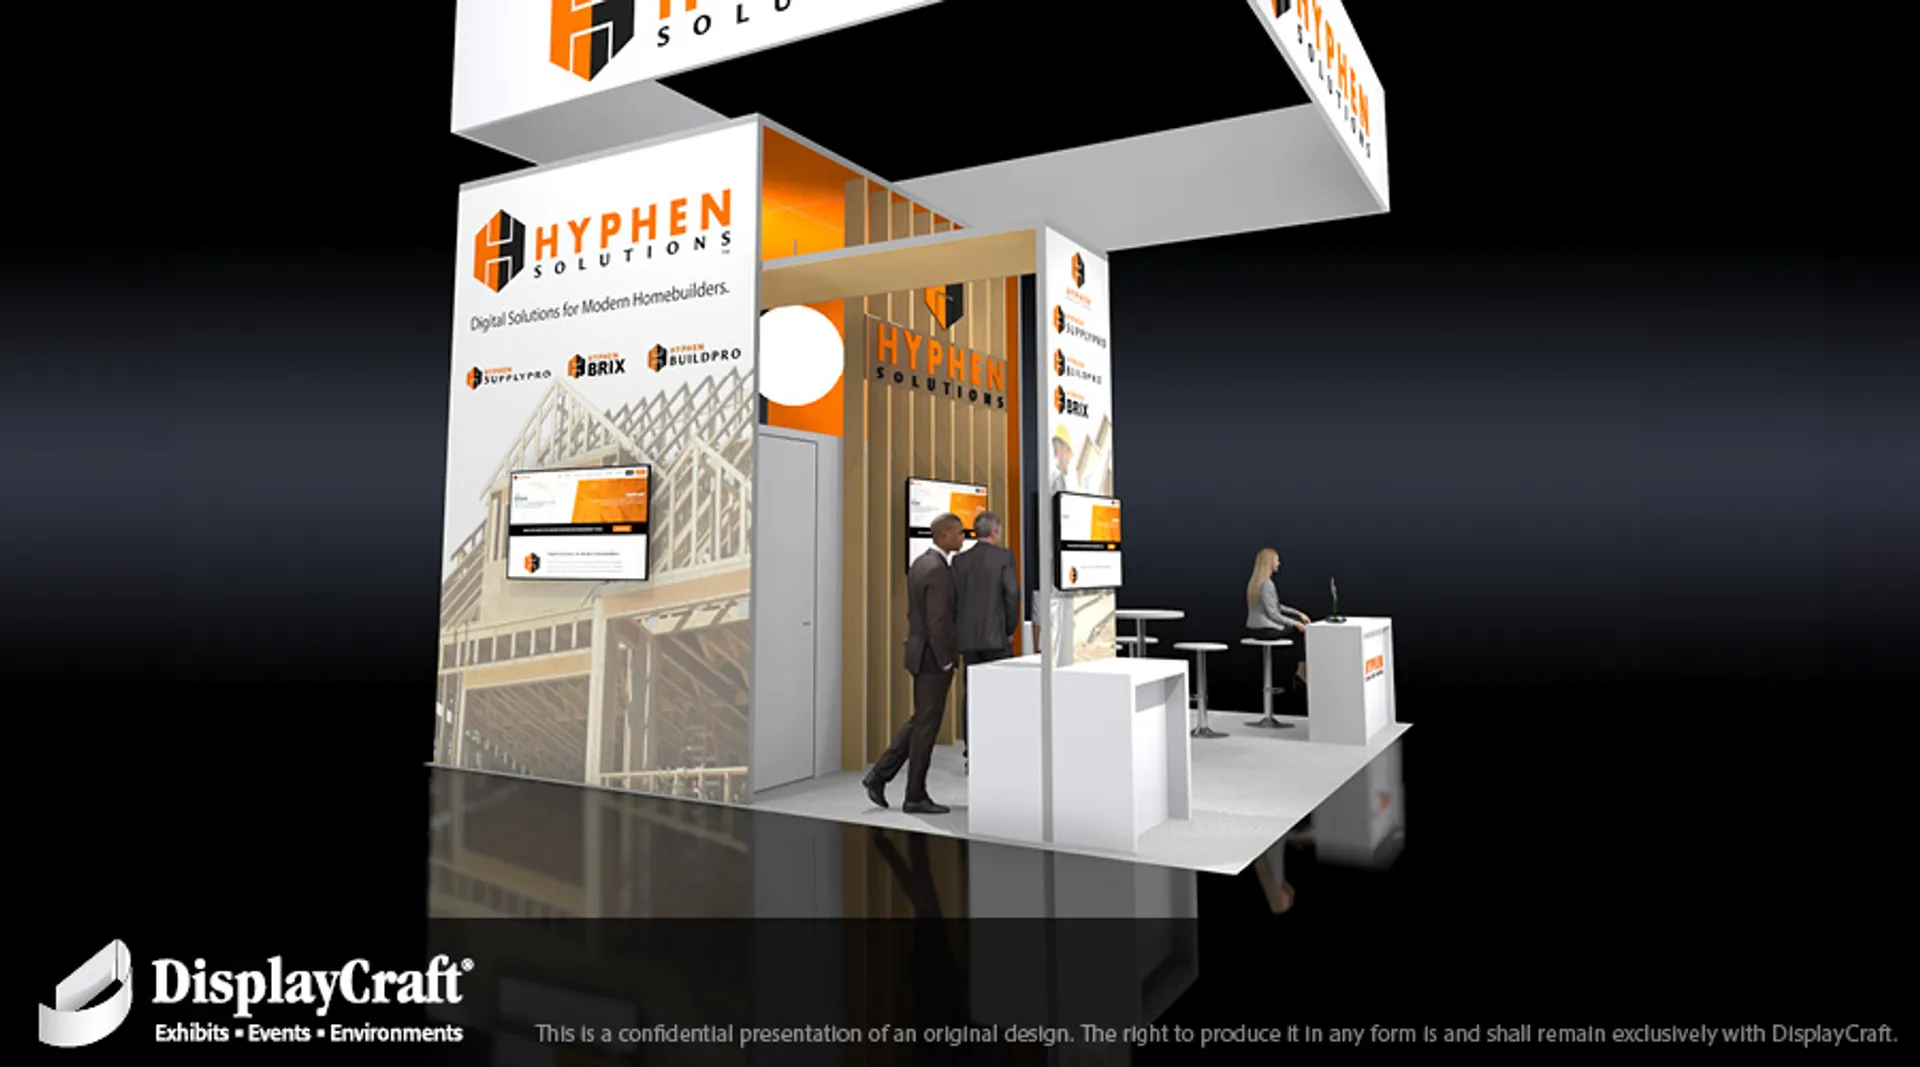 booth-design-projects/DisplayCraft/2024-04-03-20x20-ISLAND-Project-68/Hyphen 2-ouz3ig.jpg